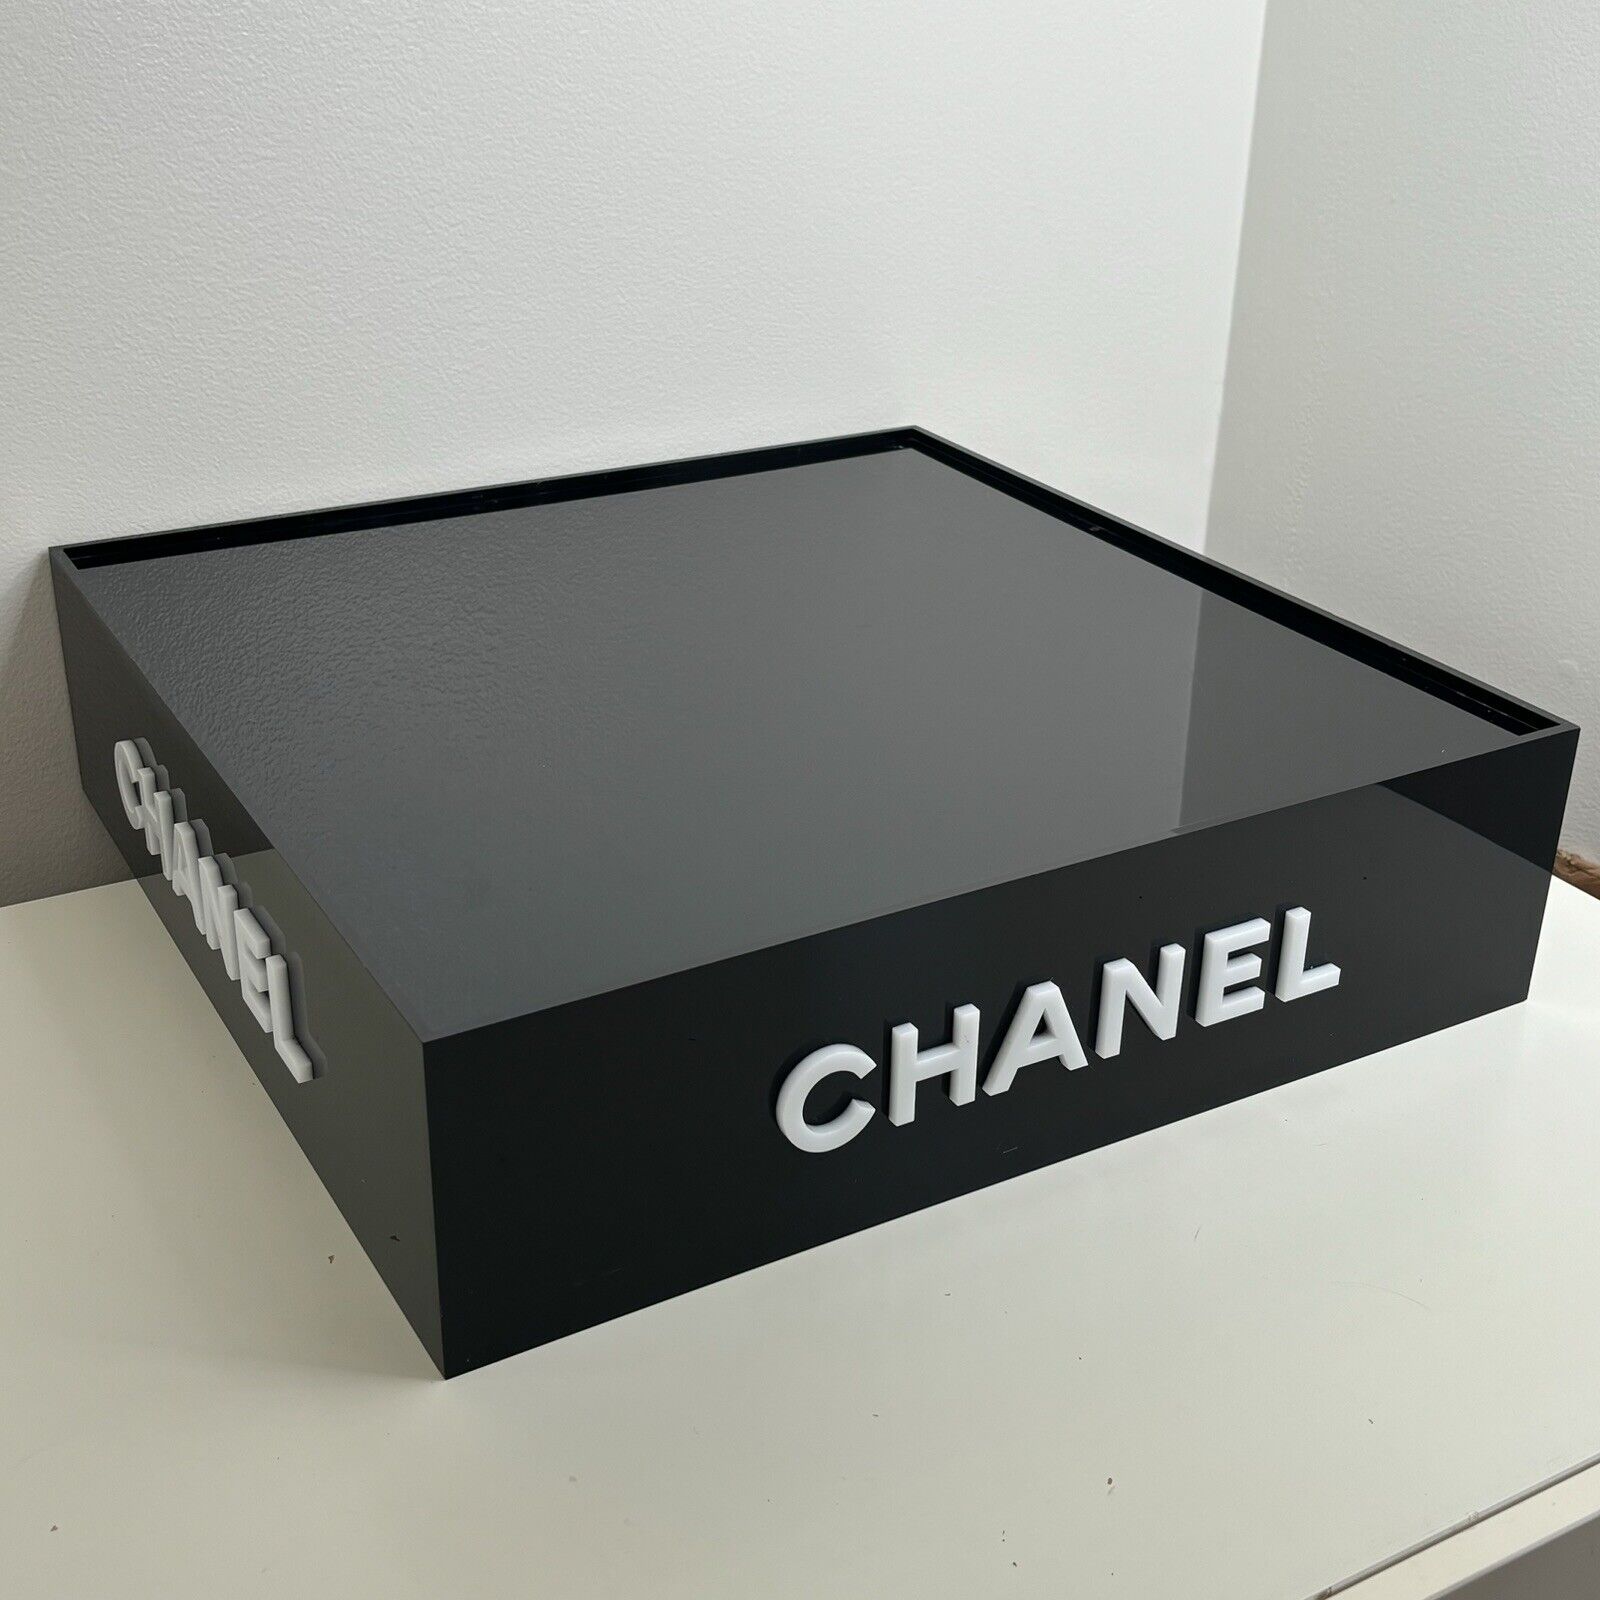 CHANEL Acrylic Perfume Counter Store Display Advertising Makeup 4 Sided 19”x19”